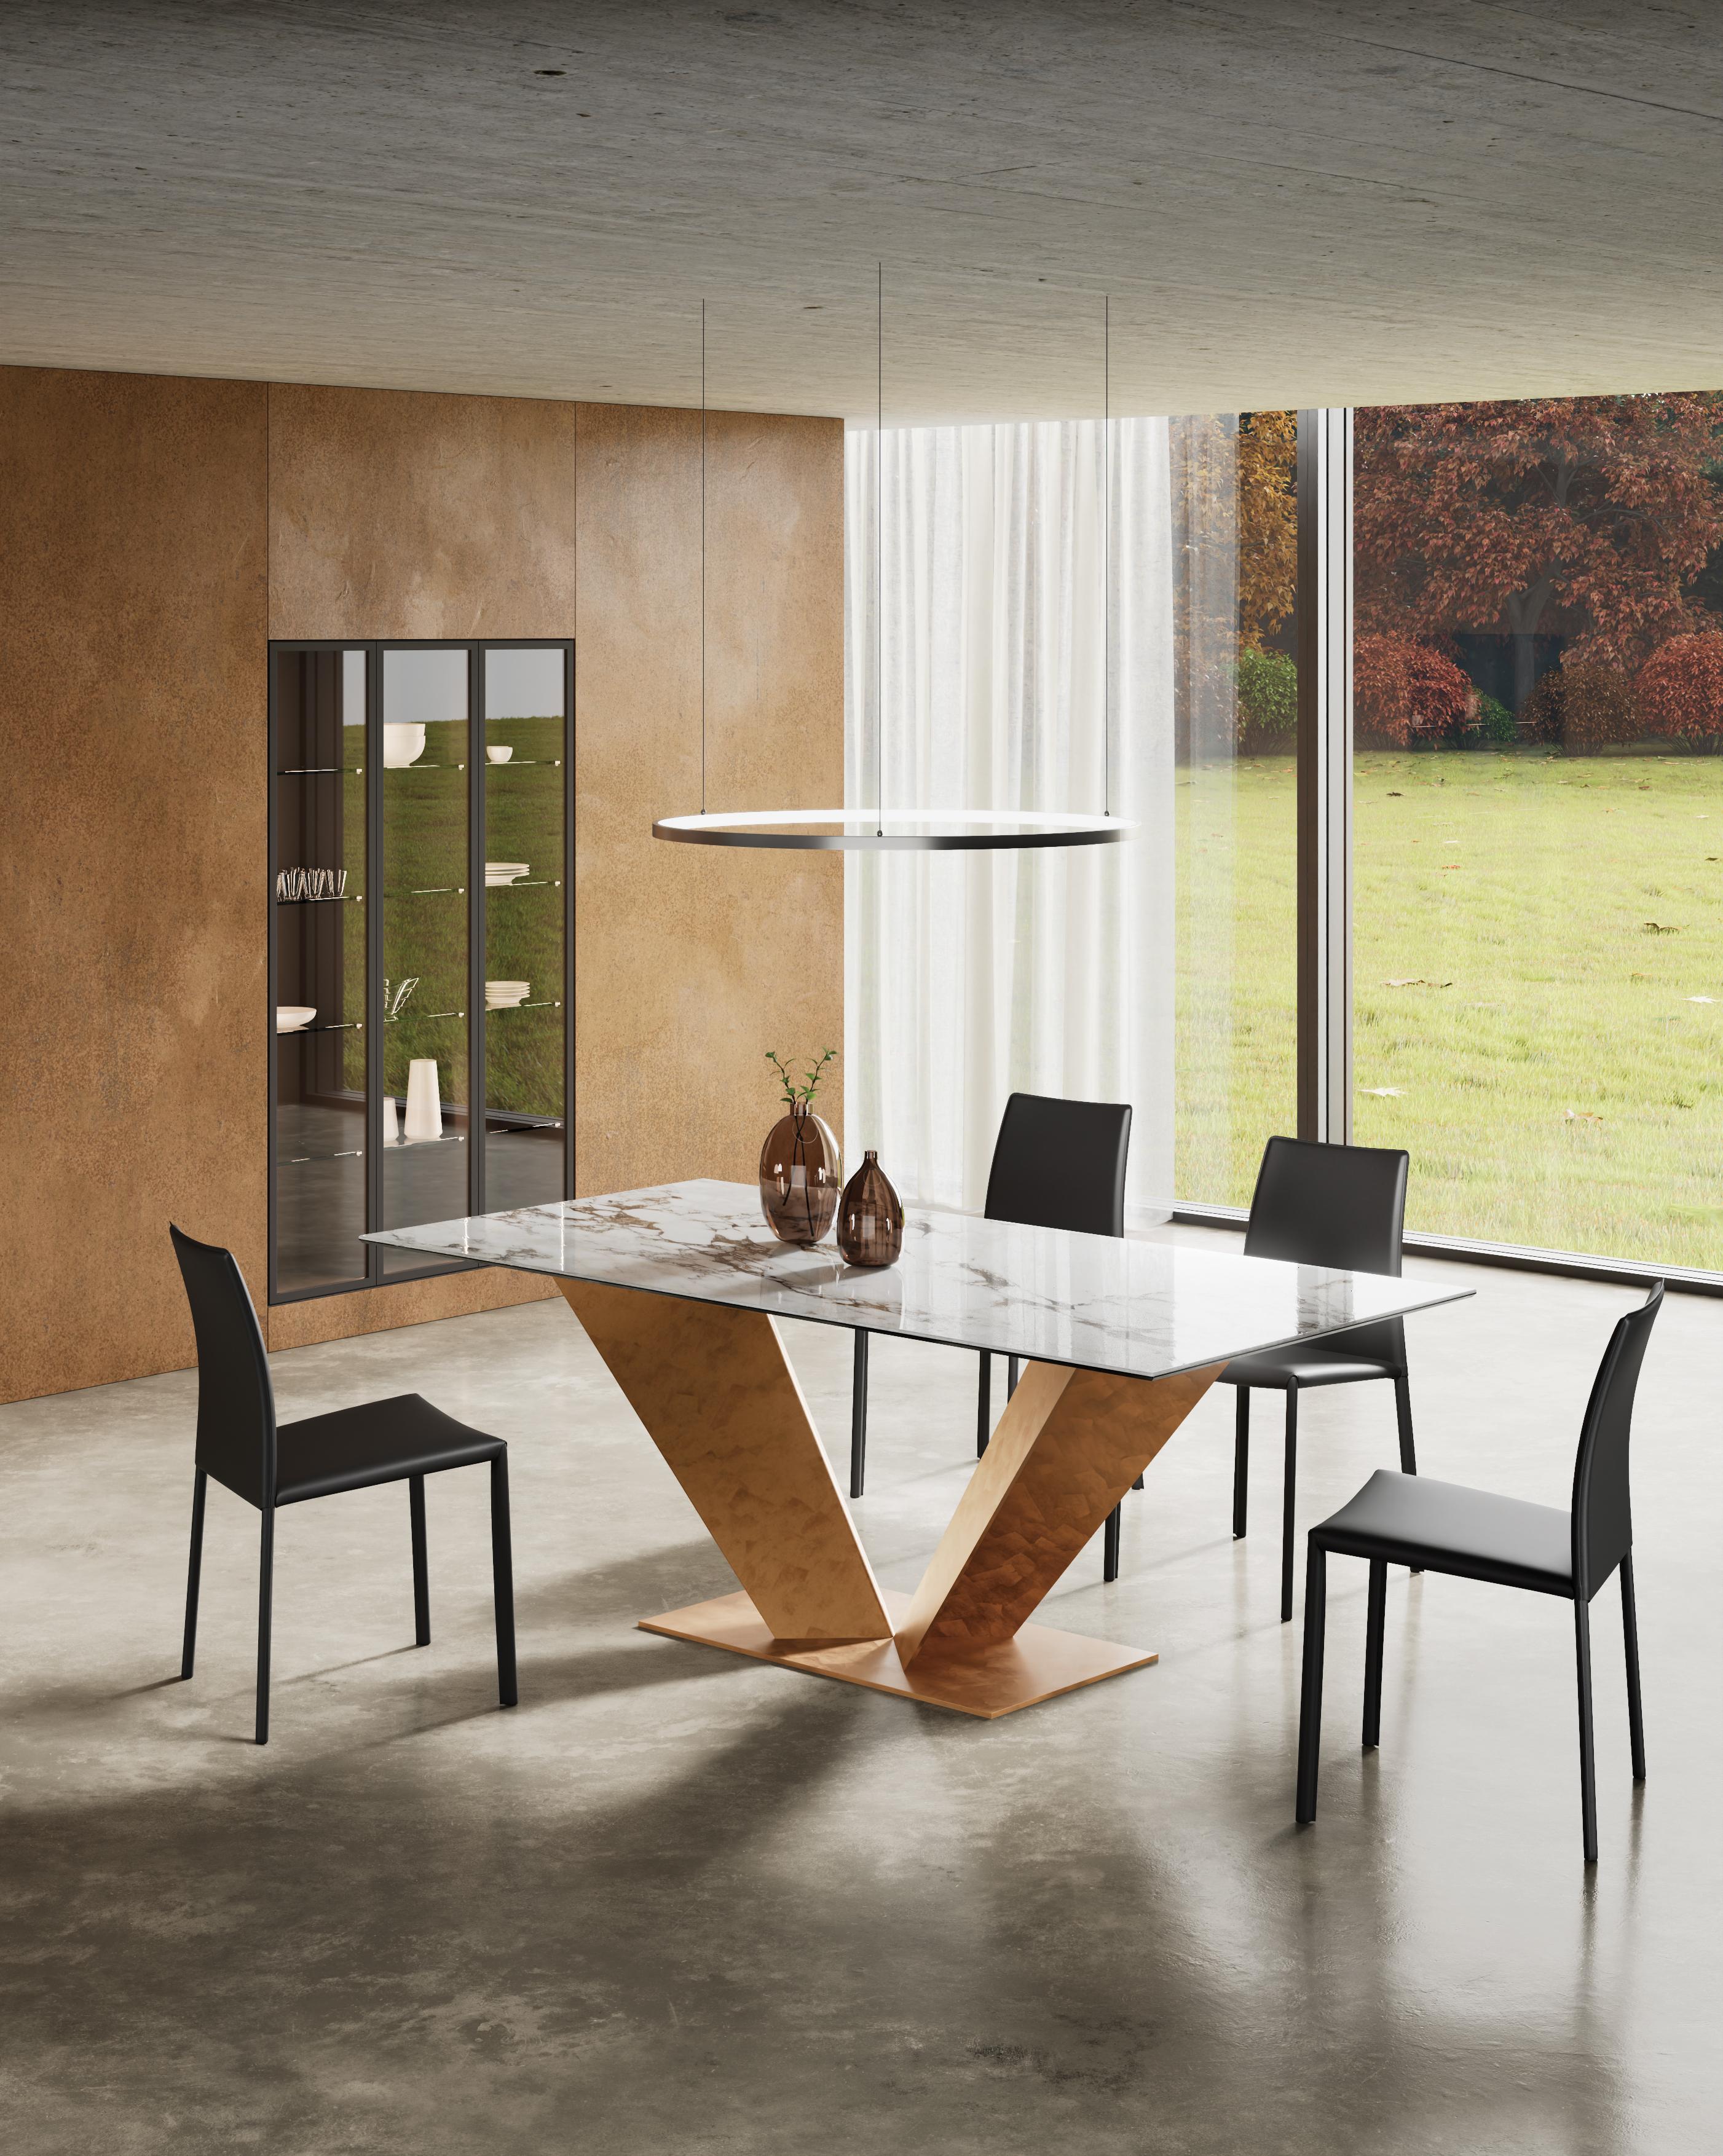 Ares Dining Table by Chinellato Design
Dimensions: W 250 x D 120 x H 72 cm
Materials:
Top: Capraia glossy Ceramic top and an Extra Clear Tempered Glass under-top.
Base: Large Piece Copper Leaf finish.


Ares, a rectangular dining table available in